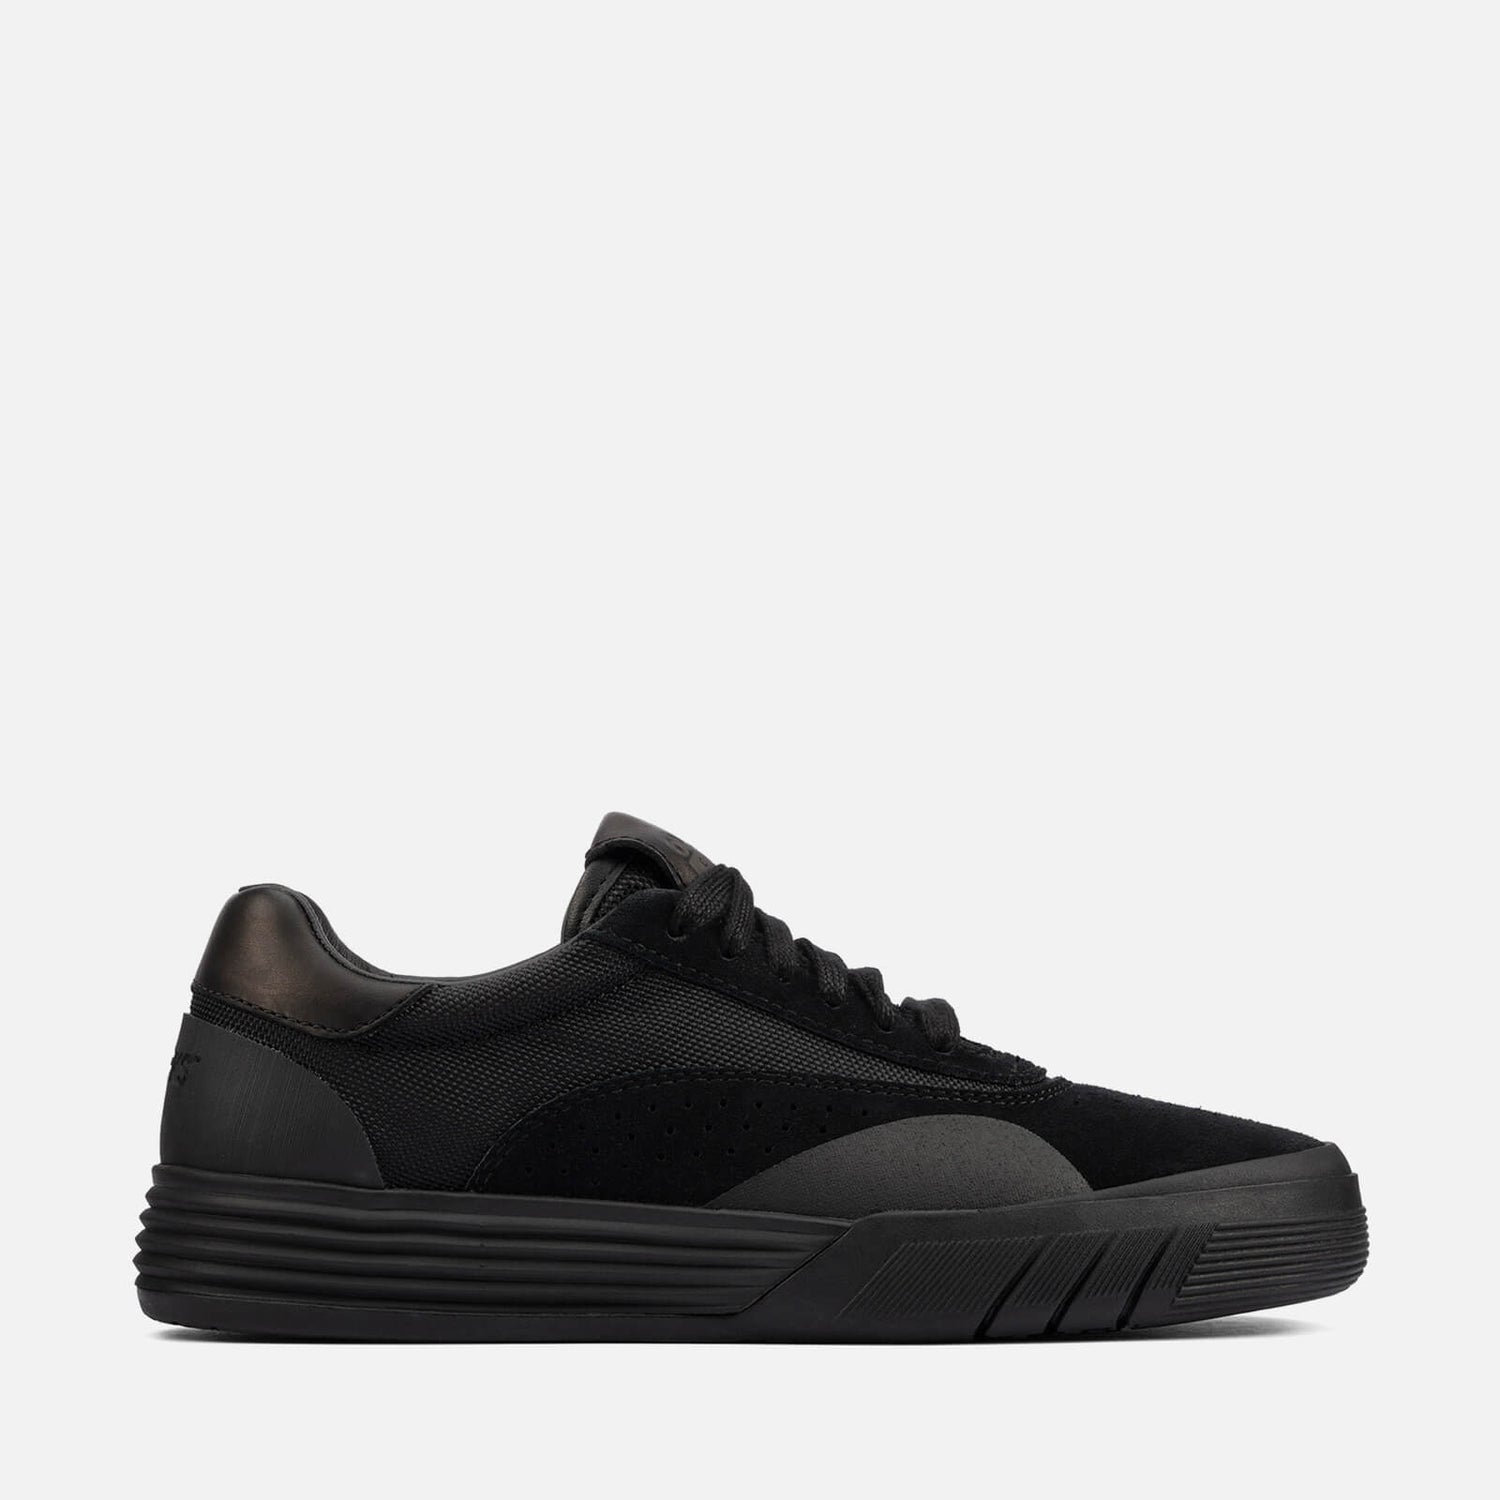 Clarks Youth Cica Trainers - Black Suede - UK 3 Kids